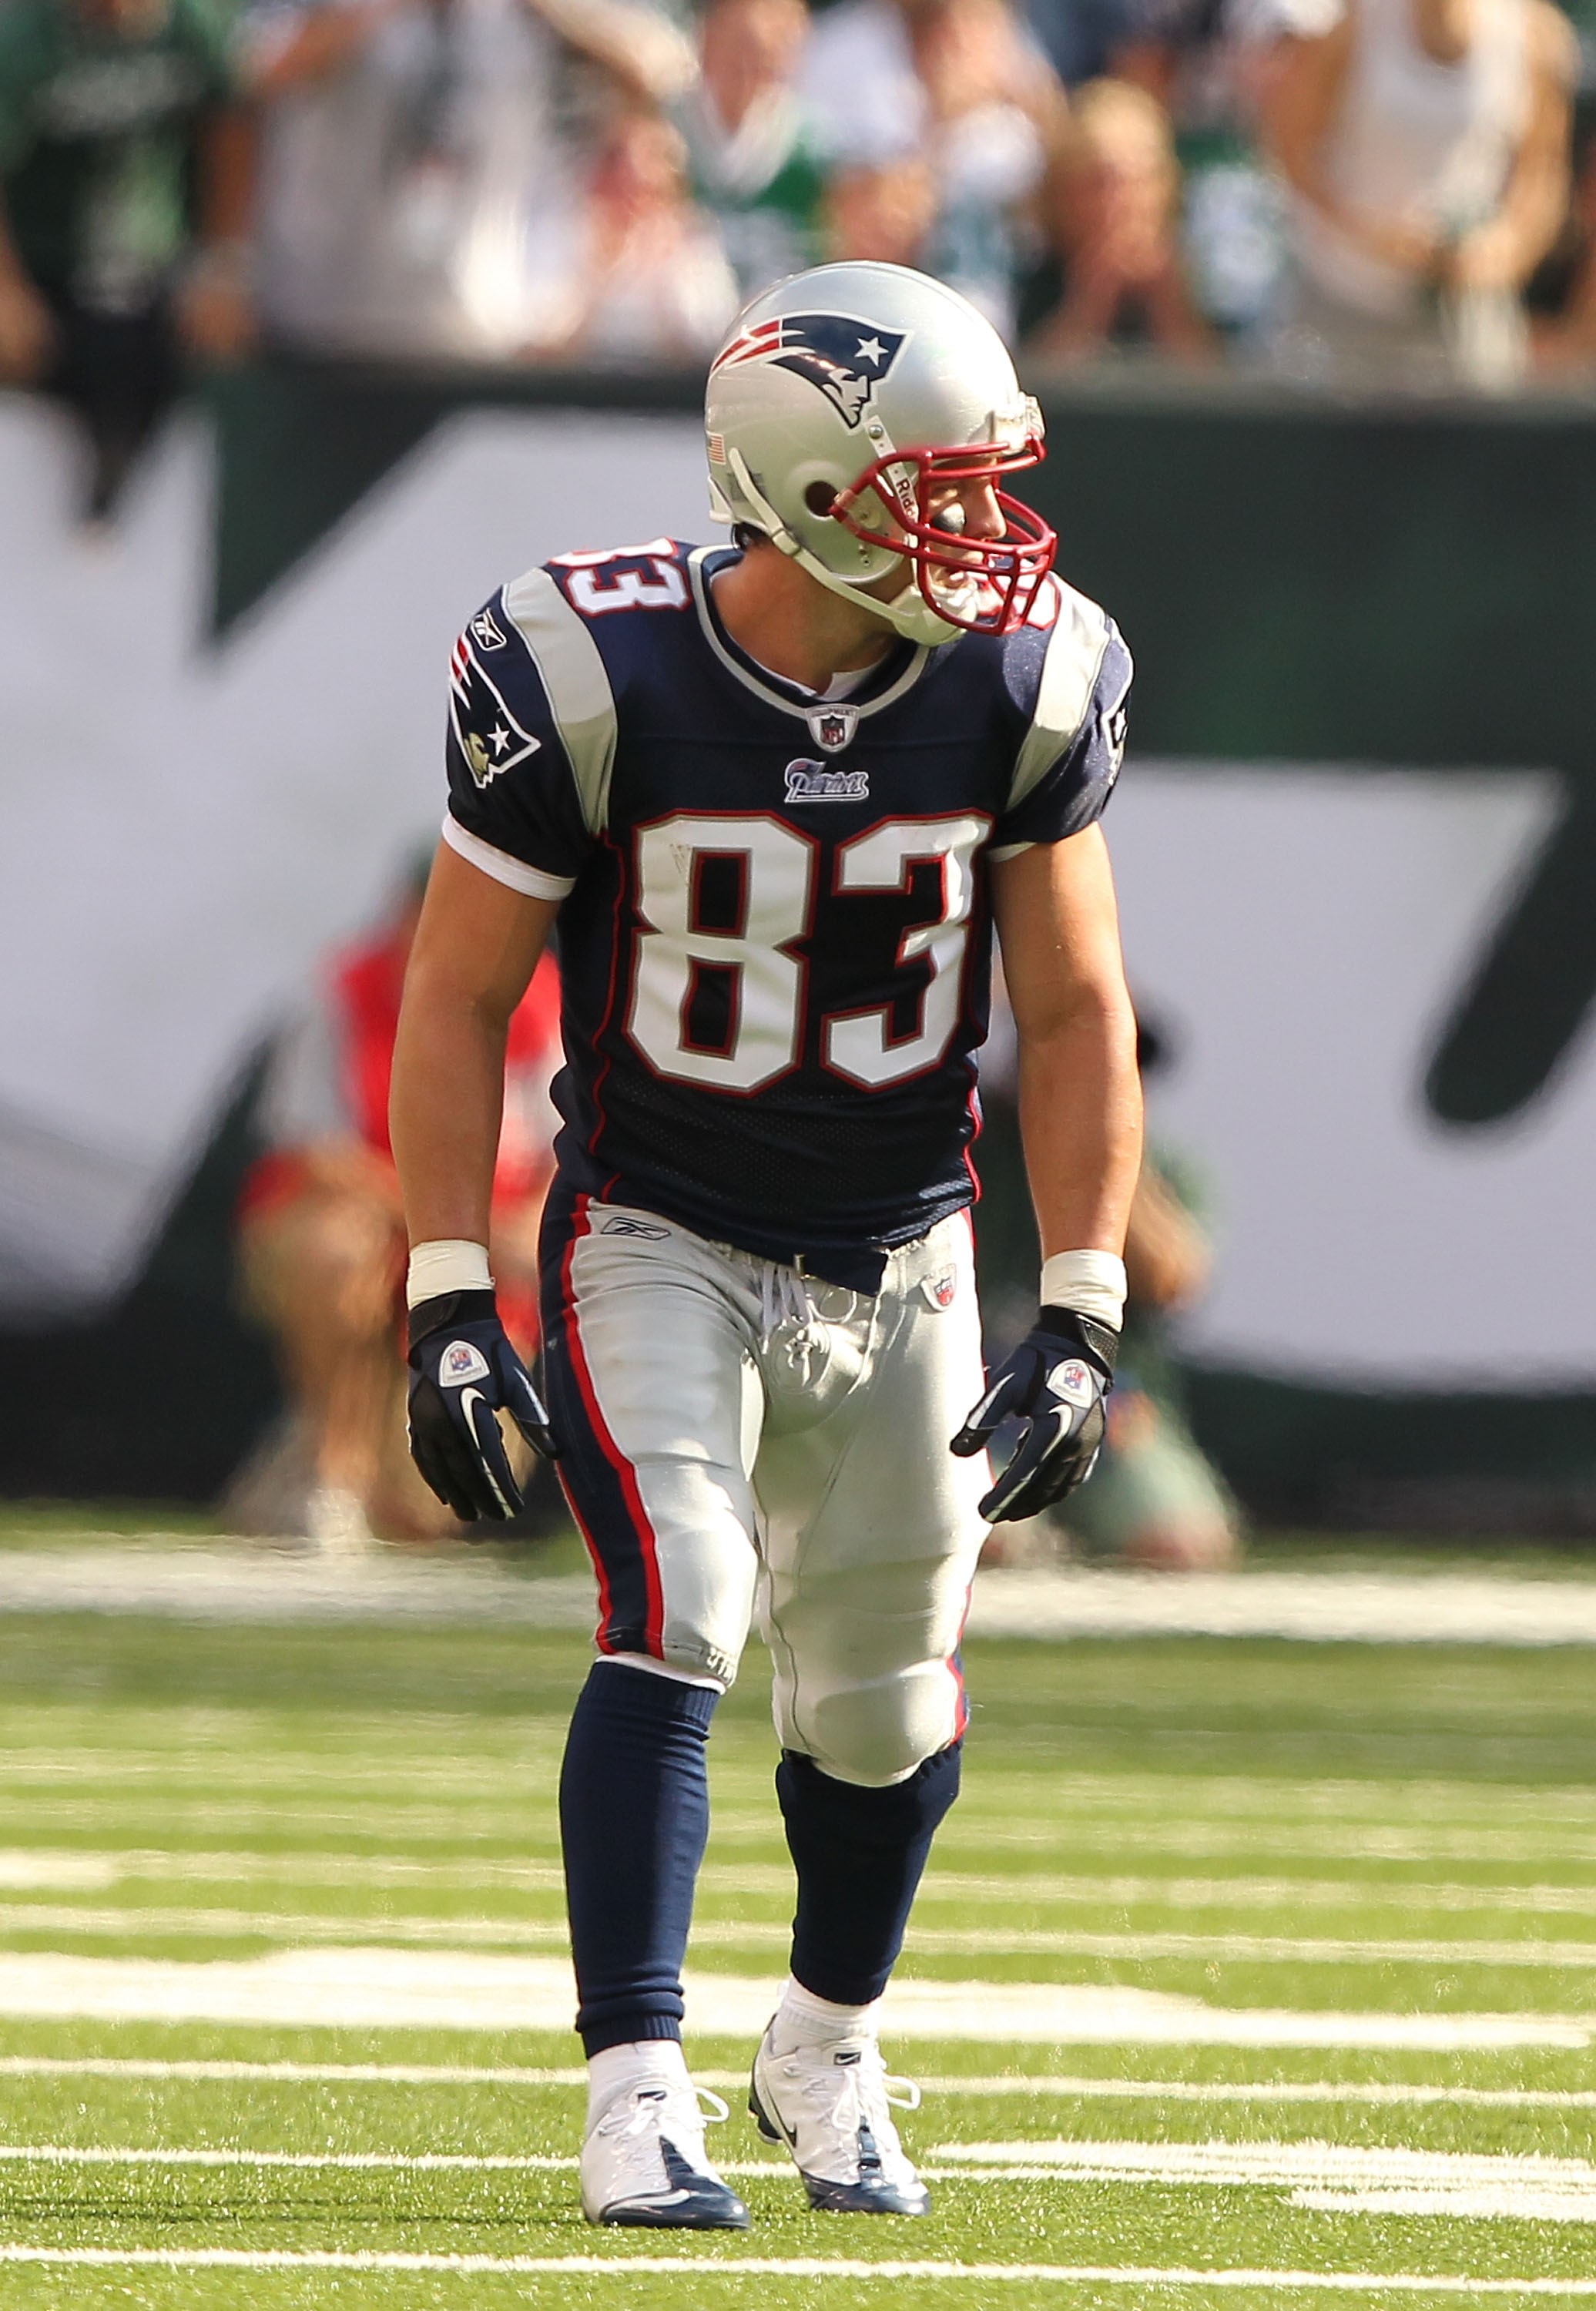 EAST RUTHERFORD, NJ - SEPTEMBER 19:  Wes Welker #83 of the New England Patriots in action against  the New York Jets during their  game on September 19, 2010 at the New Meadowlands Stadium  in East Rutherford, New Jersey.  (Photo by Al Bello/Getty Images)